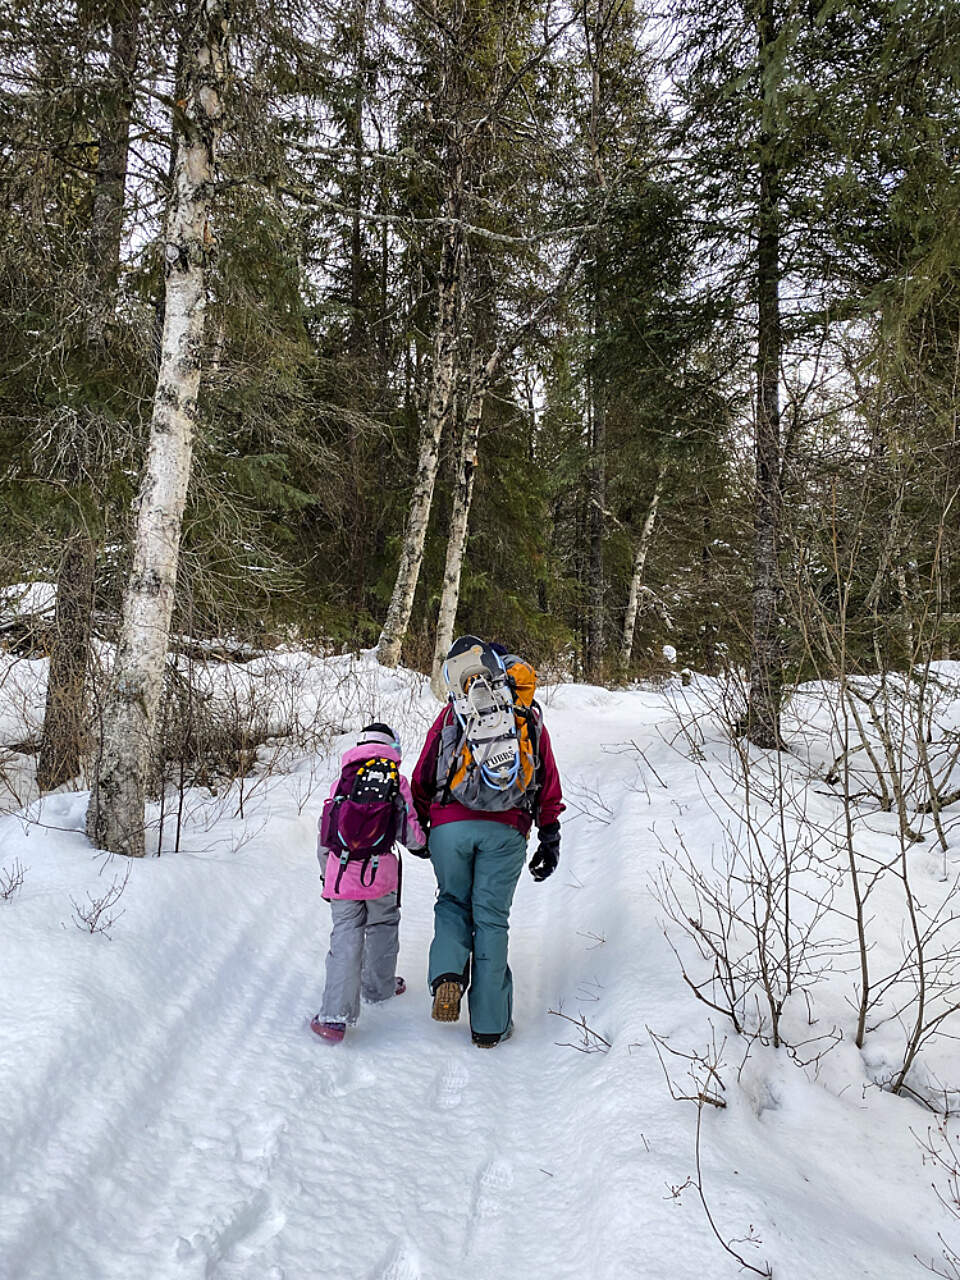 Explore Moose Pass on a guided hike or snowshoe tour